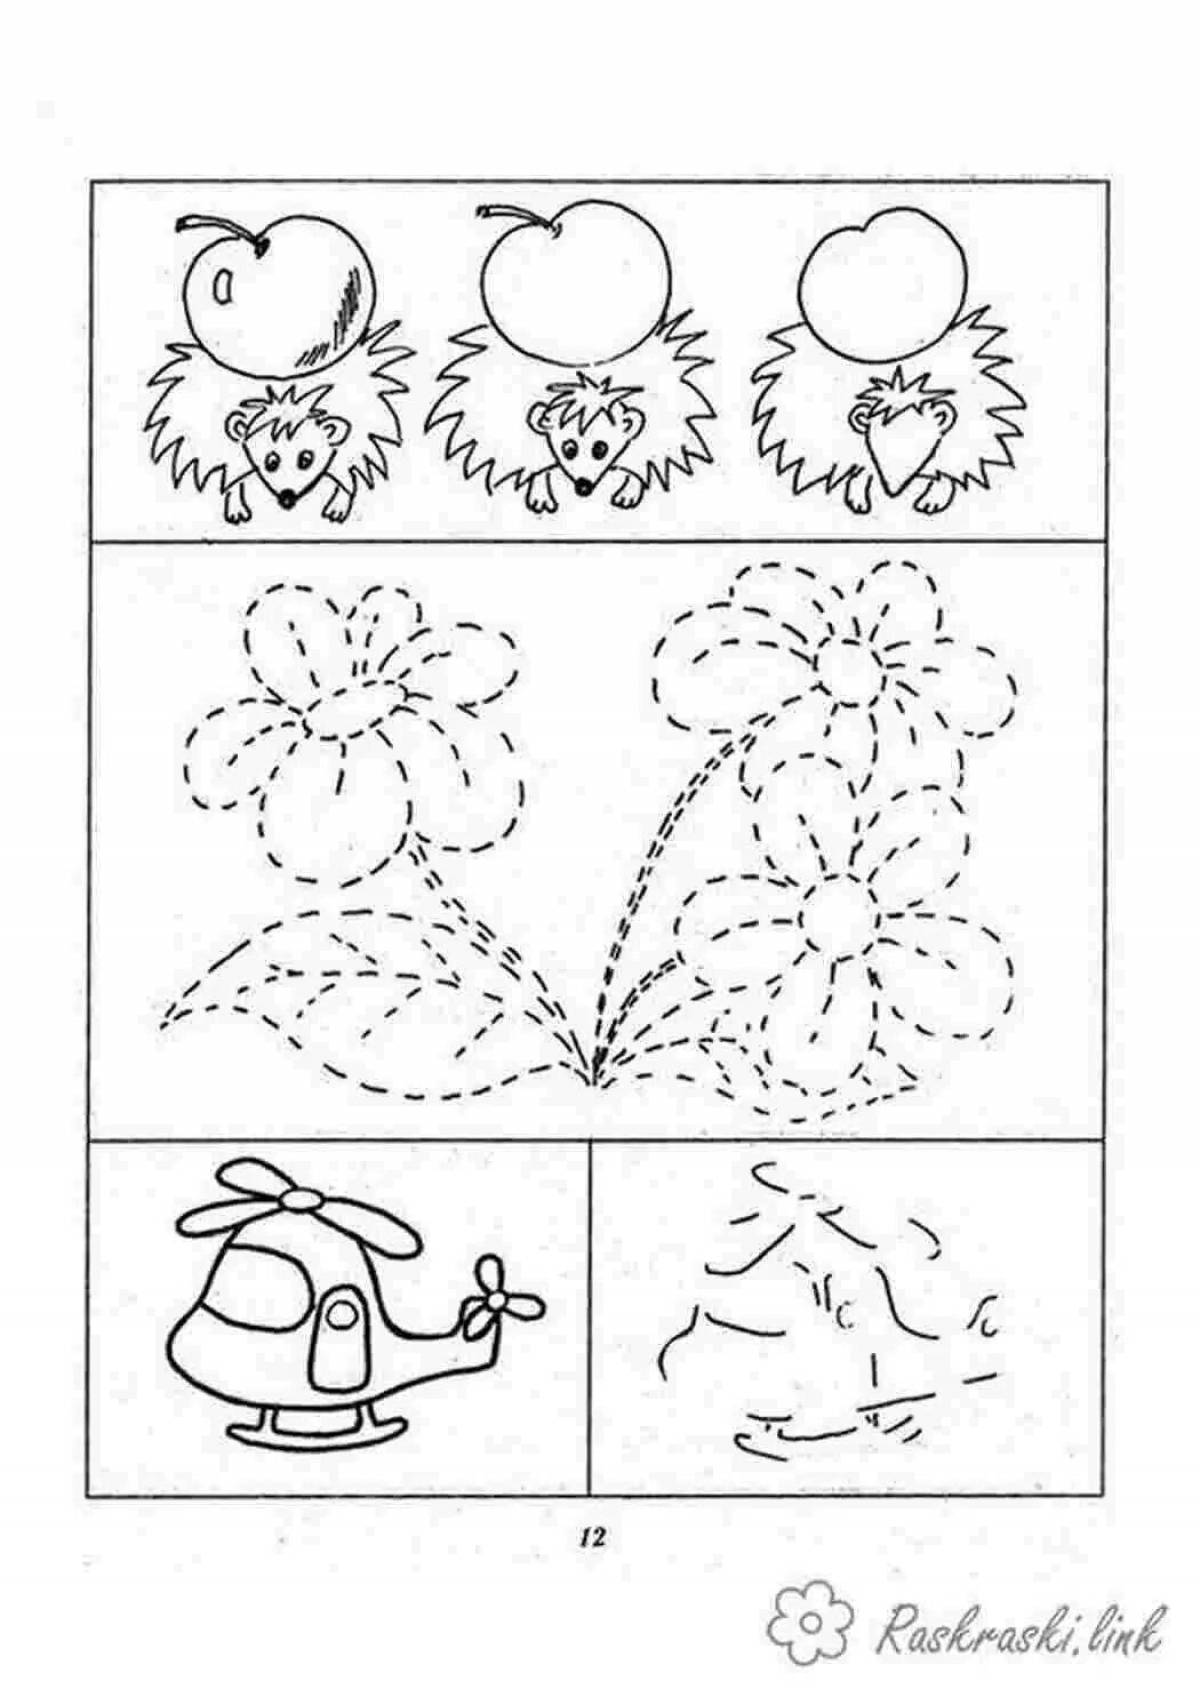 Coloring book for the development of fine motor skills